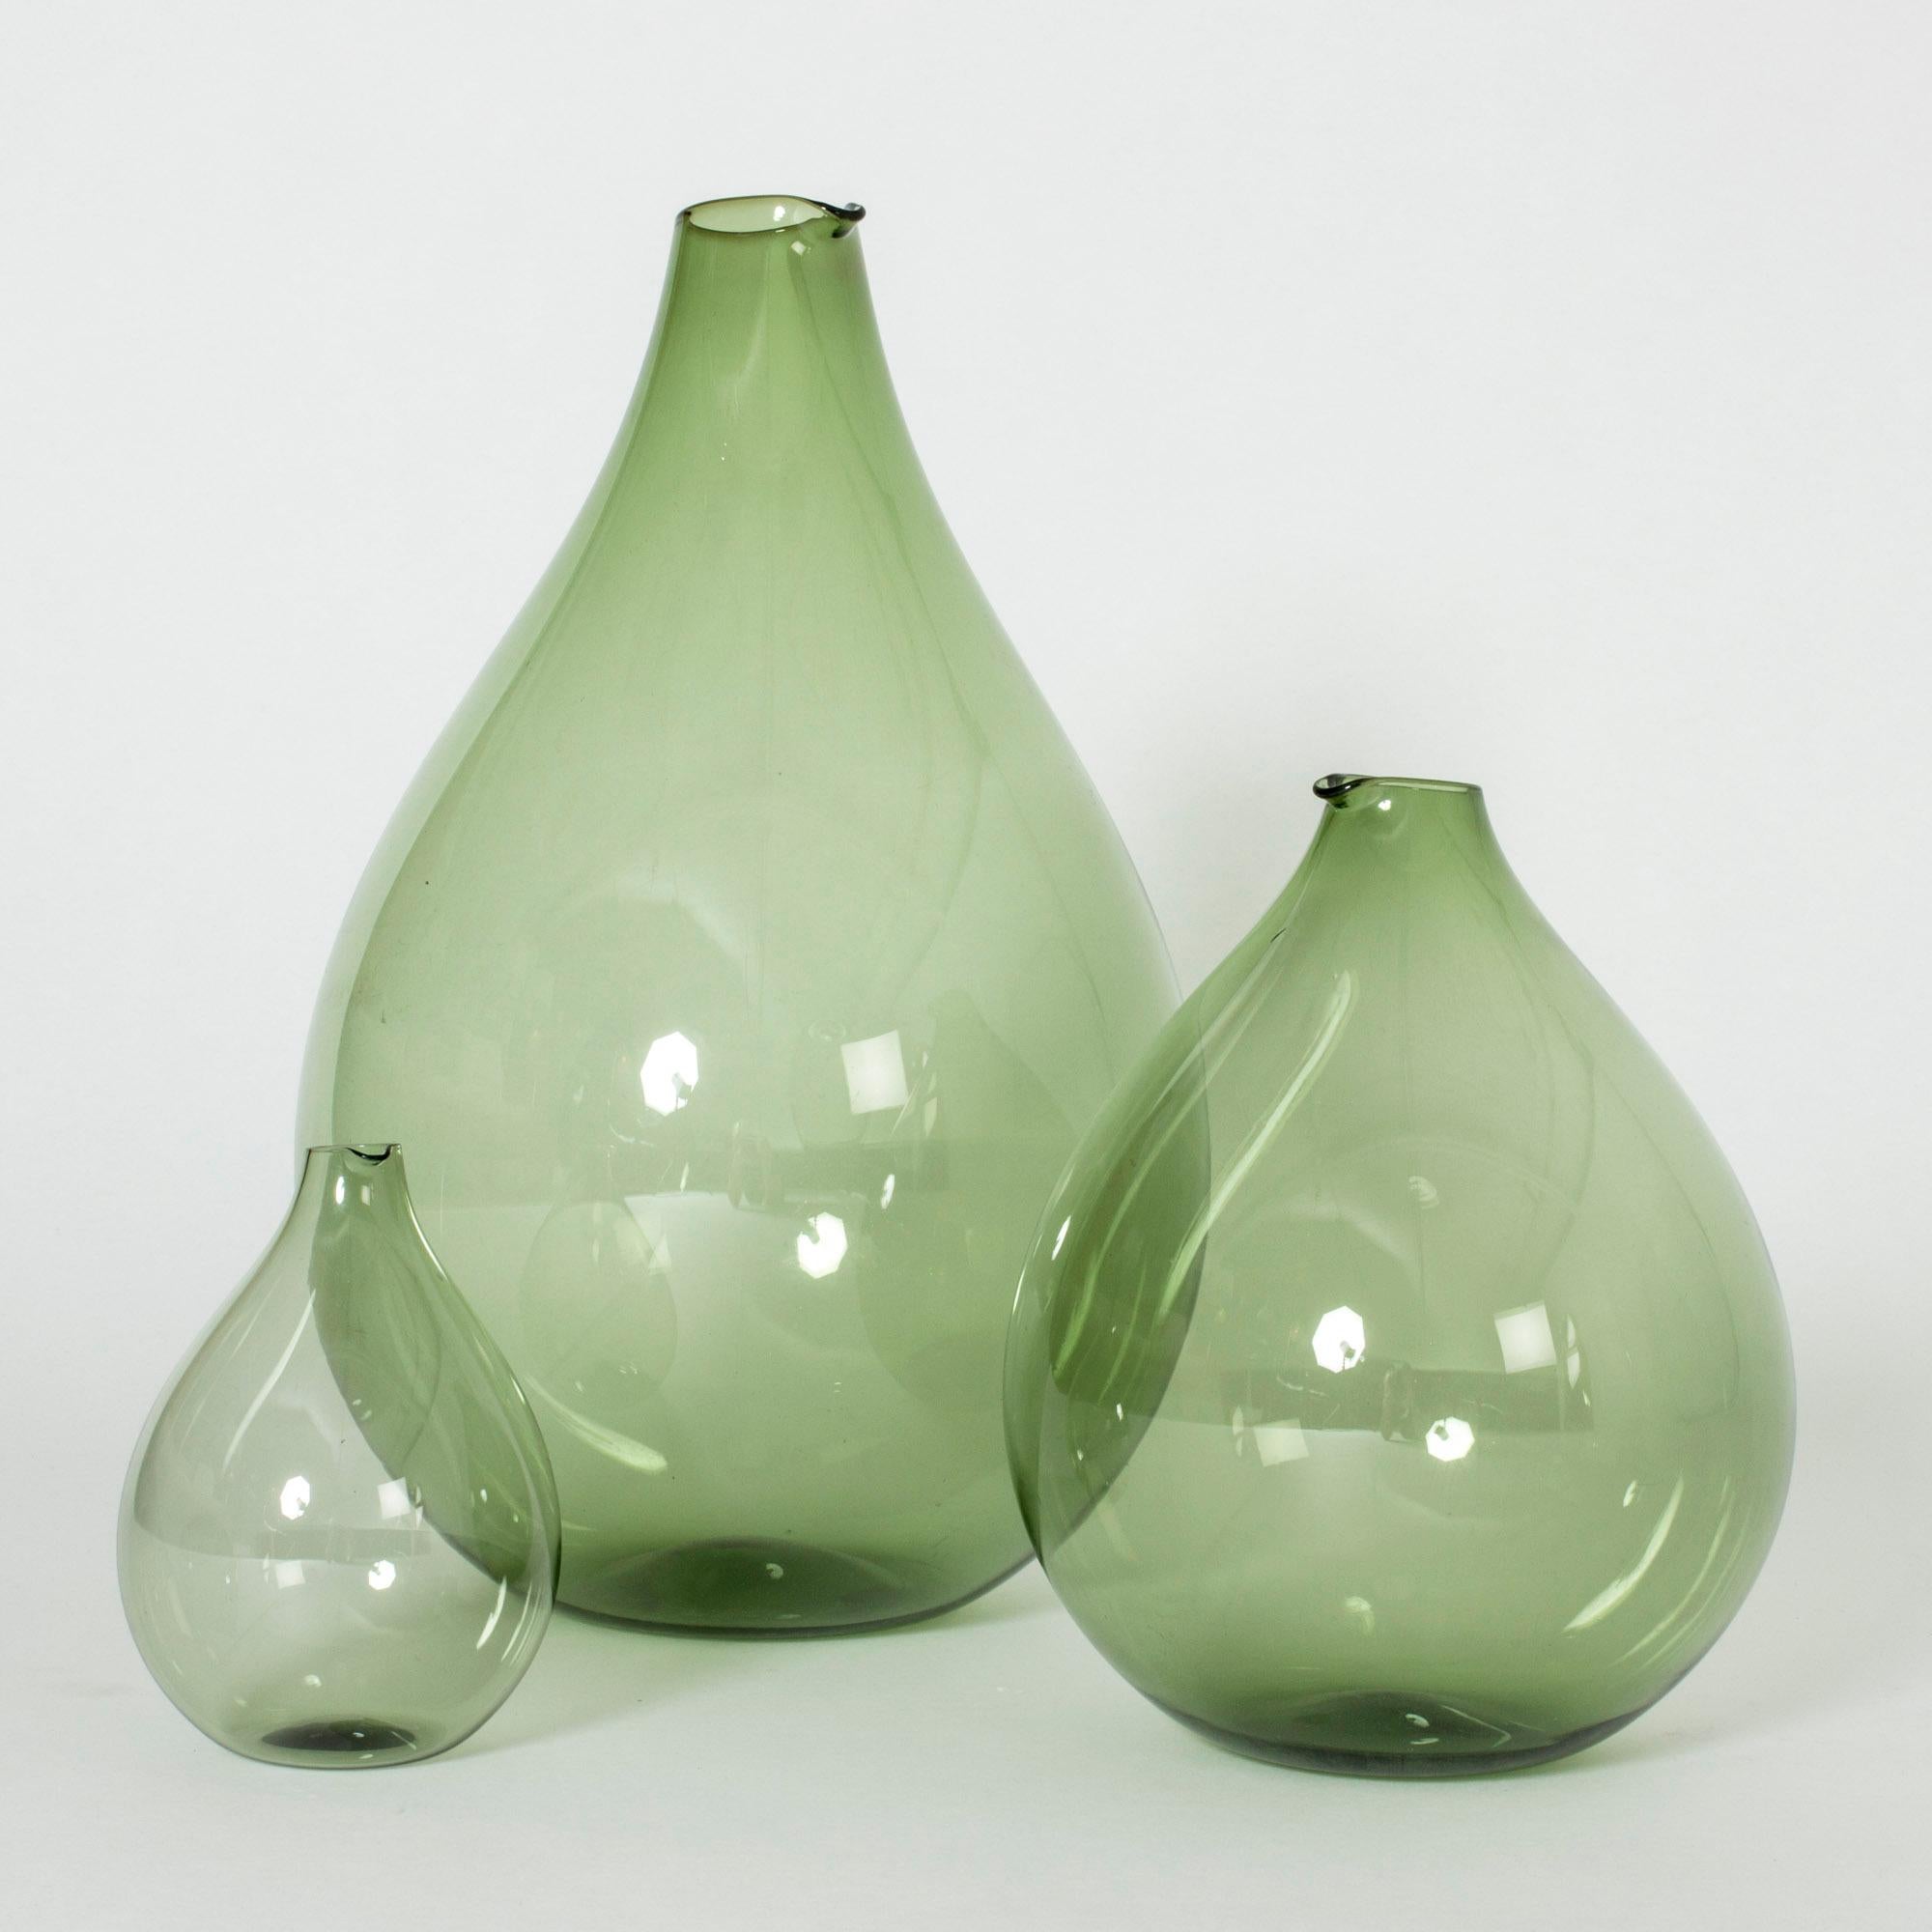 Set of three beautiful vases or decanters by Kjell Blomberg. Made in thin, green glass with a look of soap bubble delicacy, in generous drop shapes.